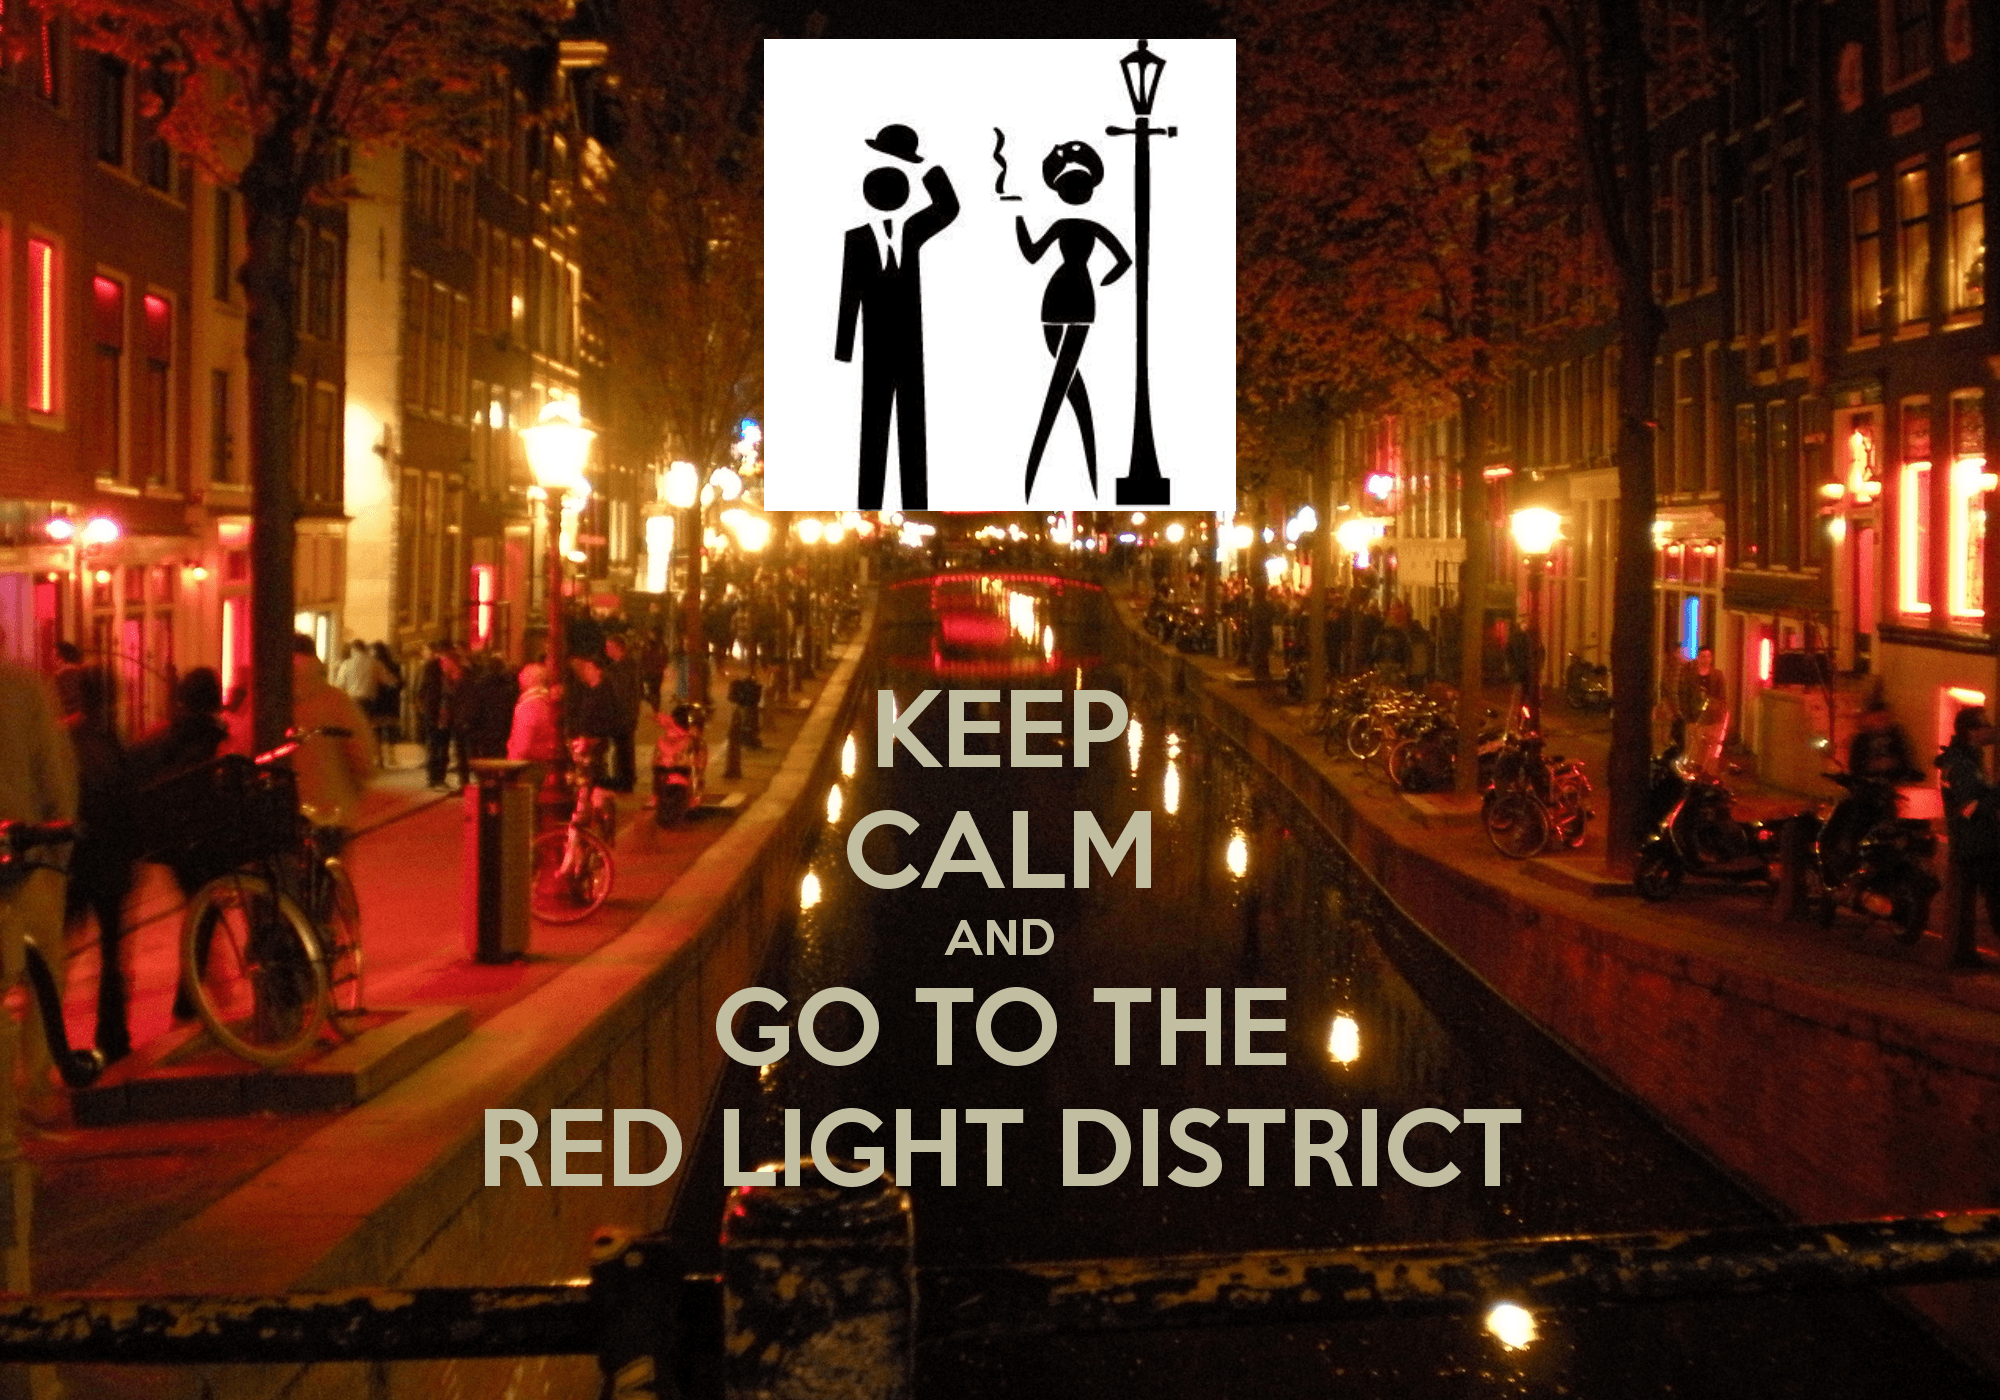 I'm a window hostess in a red light district, AMA, part 3